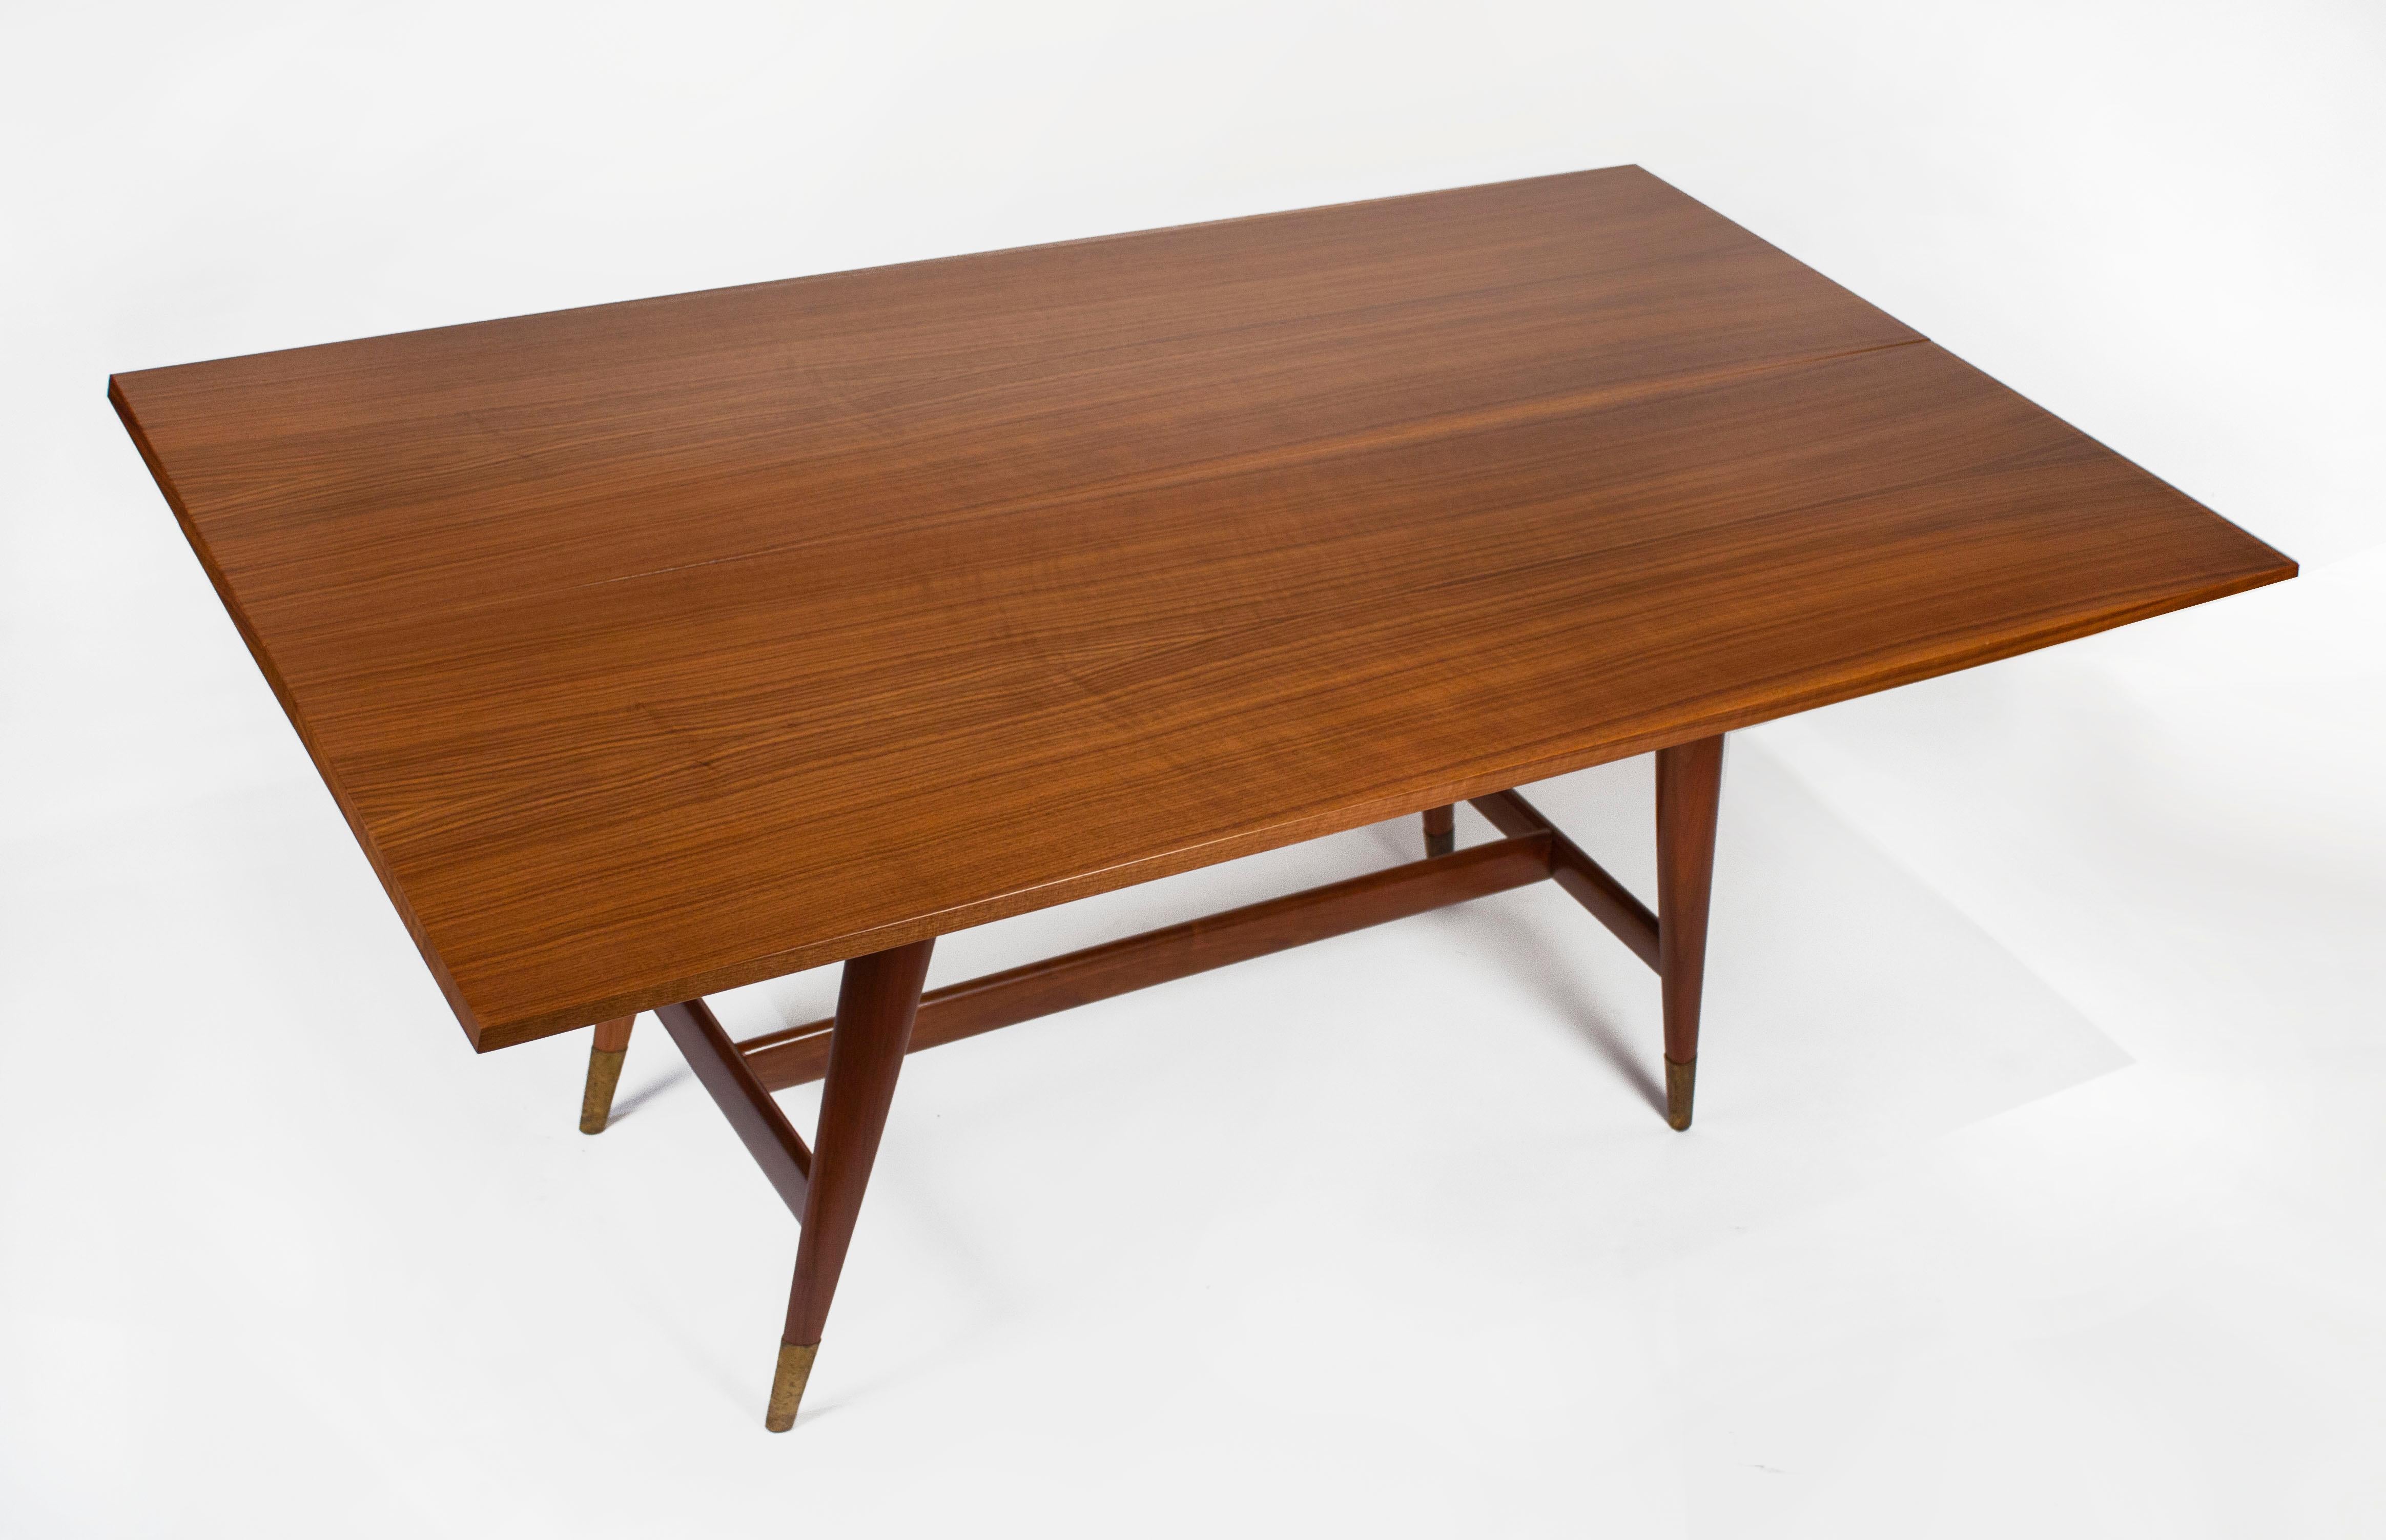 Vintage Model 2134 Italian walnut flip-top table designed by Gio Ponti for M. Singer & Sons.
Two book-matched Italian walnut tops with beveled edges connected with recessed hinges over solid walnut tapering legs with brass sabots. The tops easily